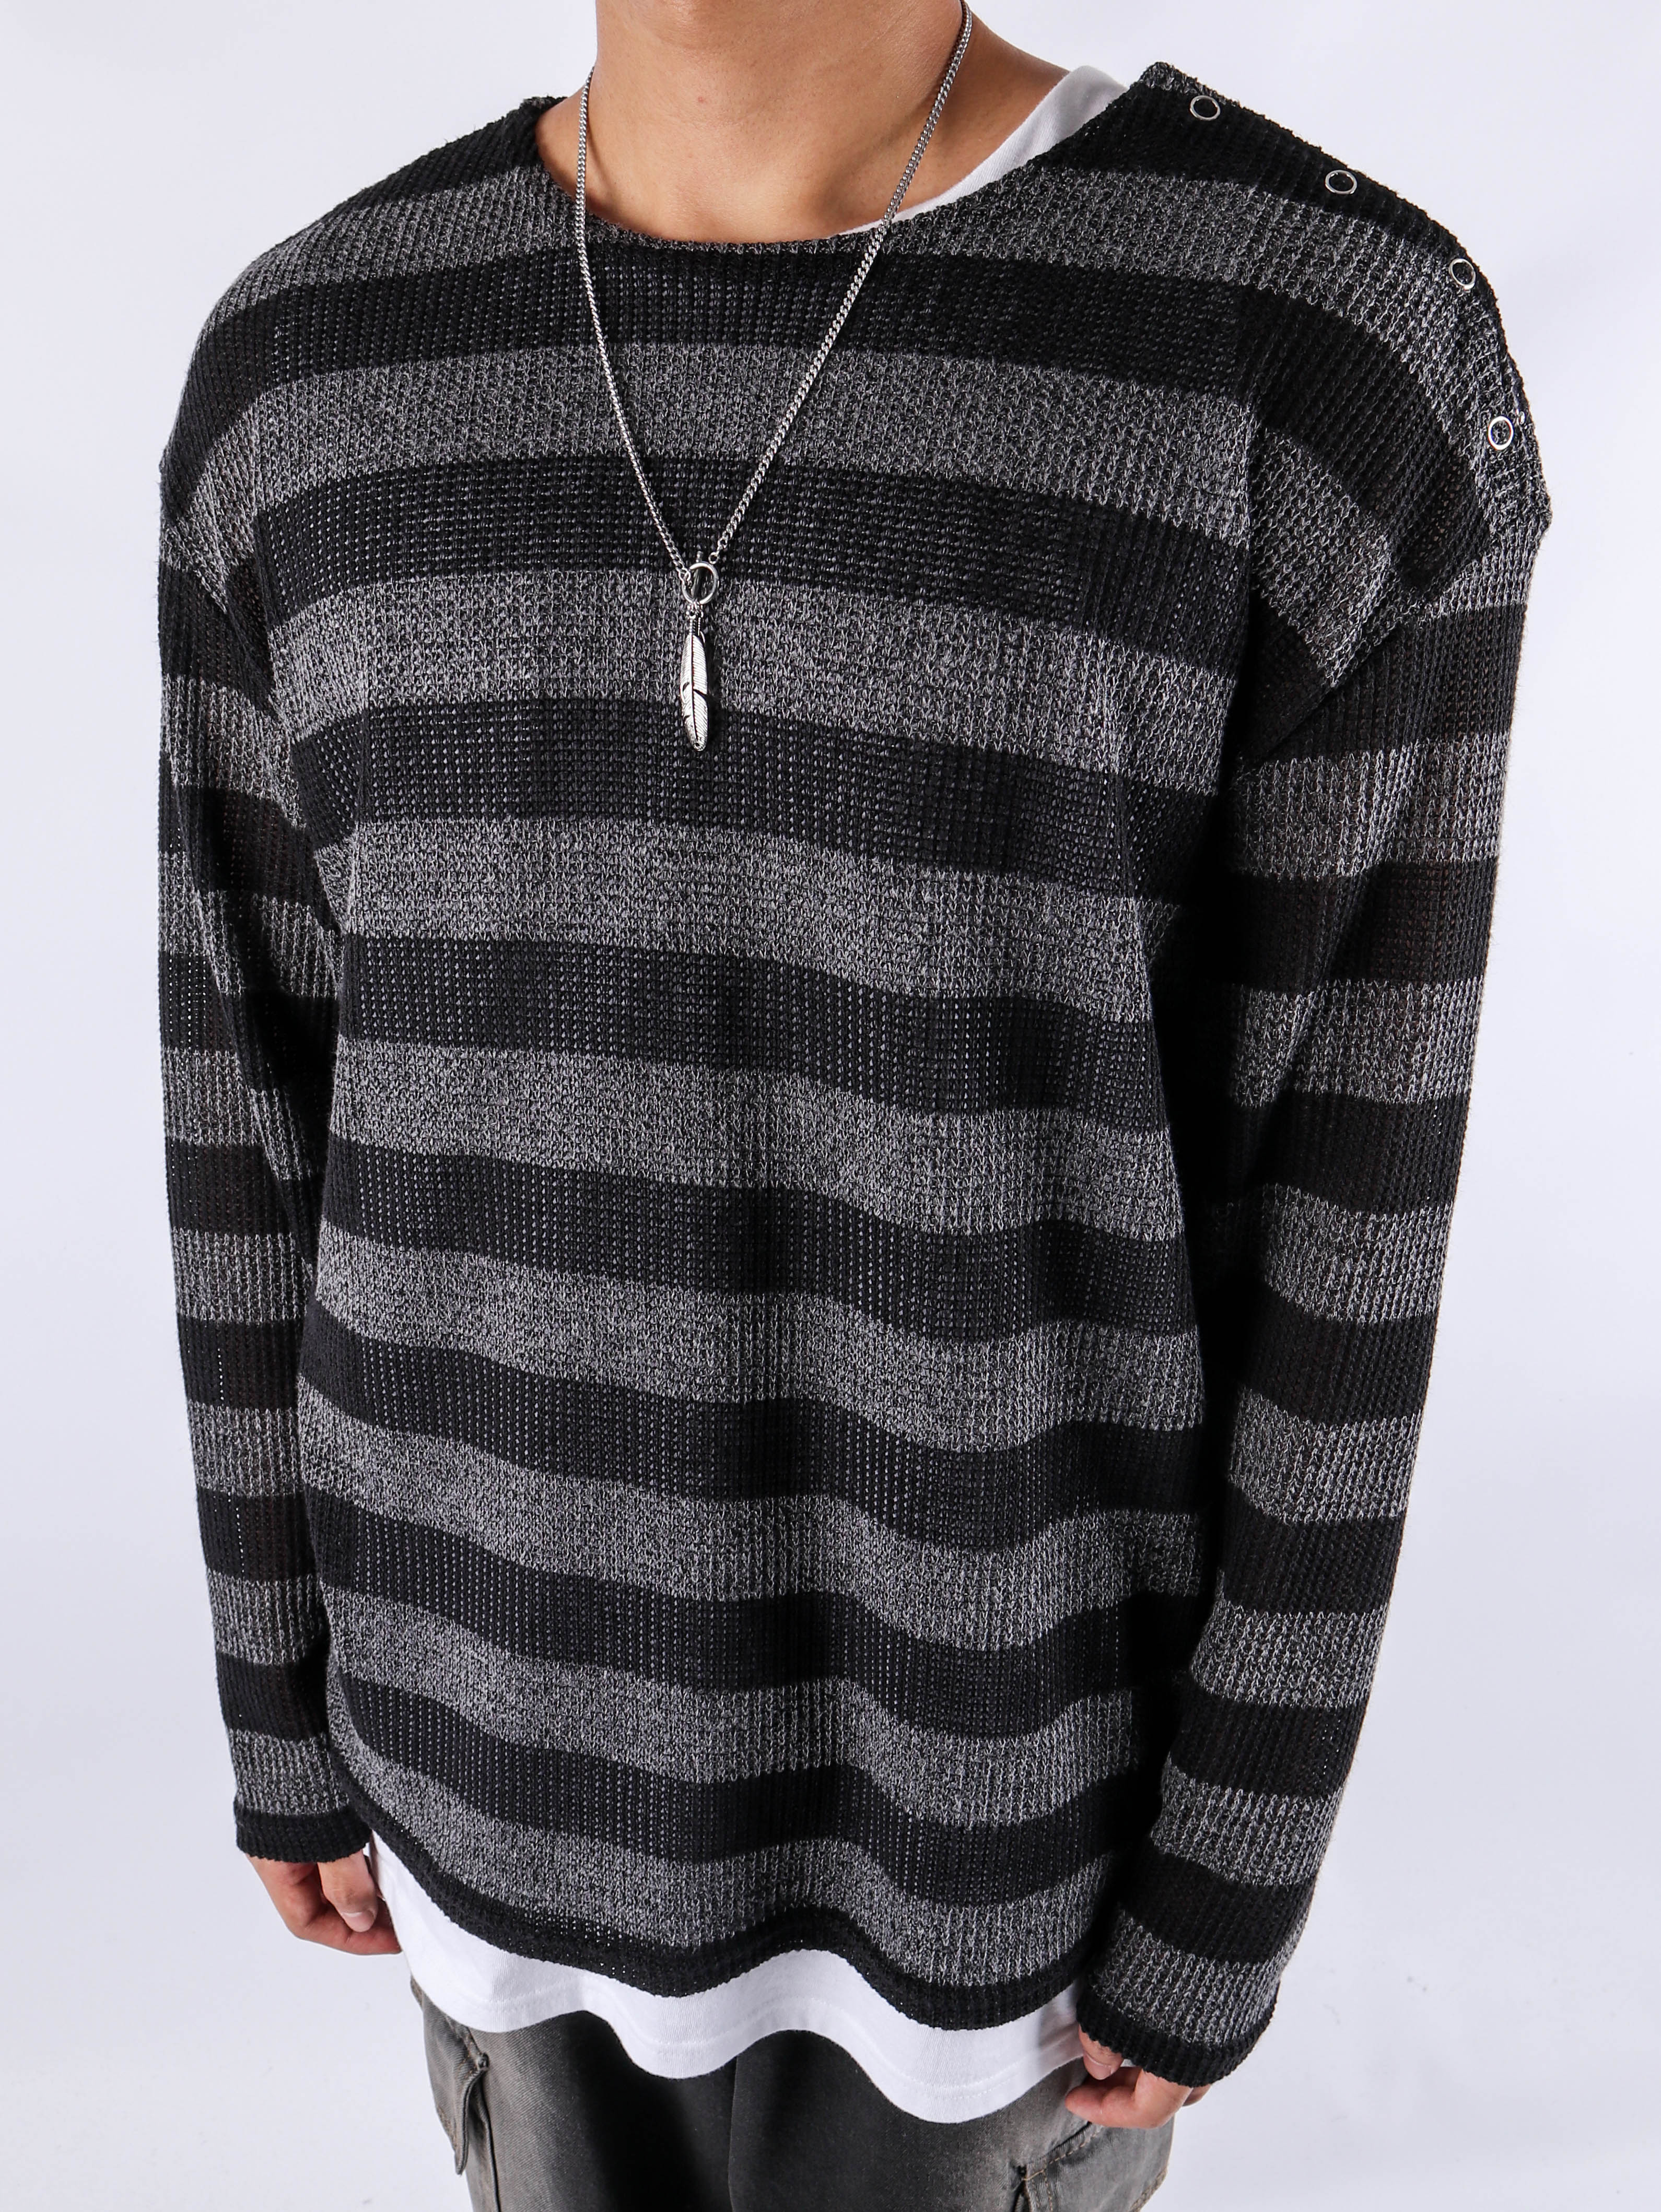 RG To Striped Mesh Long Sleeves (2color)